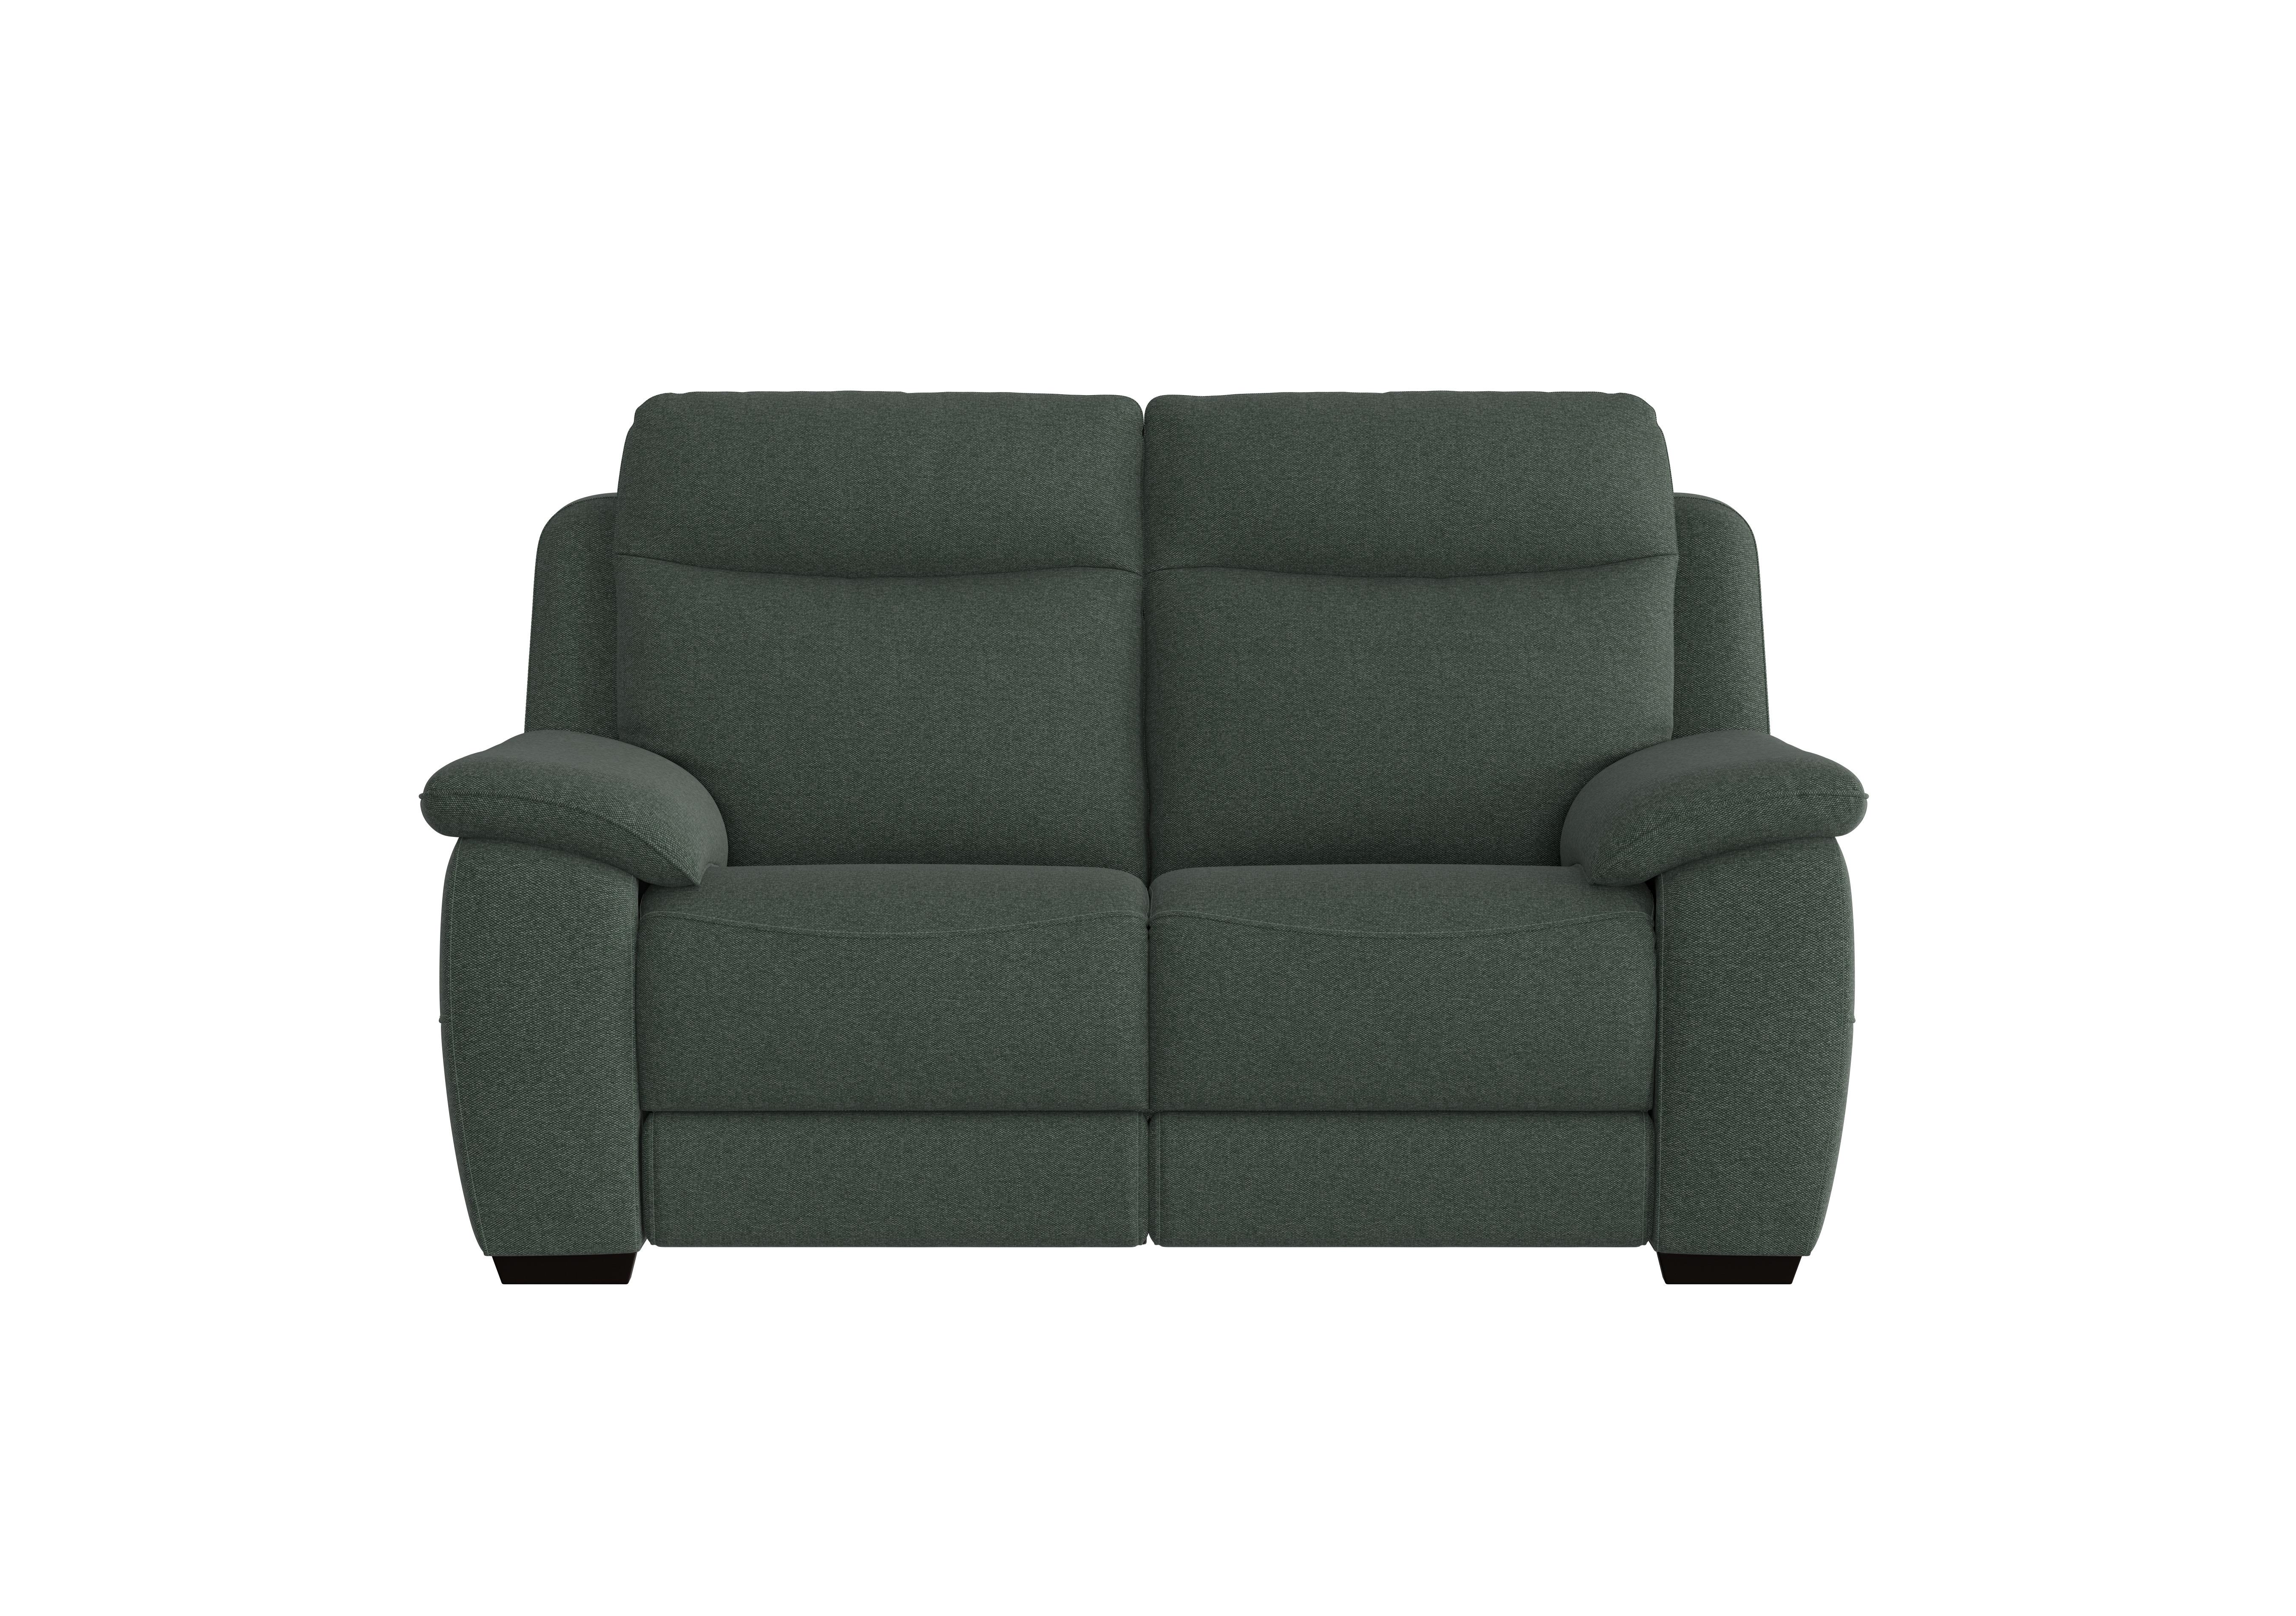 Starlight Express 2 Seater Fabric Recliner Sofa with Power Headrests in Fab-Ska-R48 Moss Green on Furniture Village